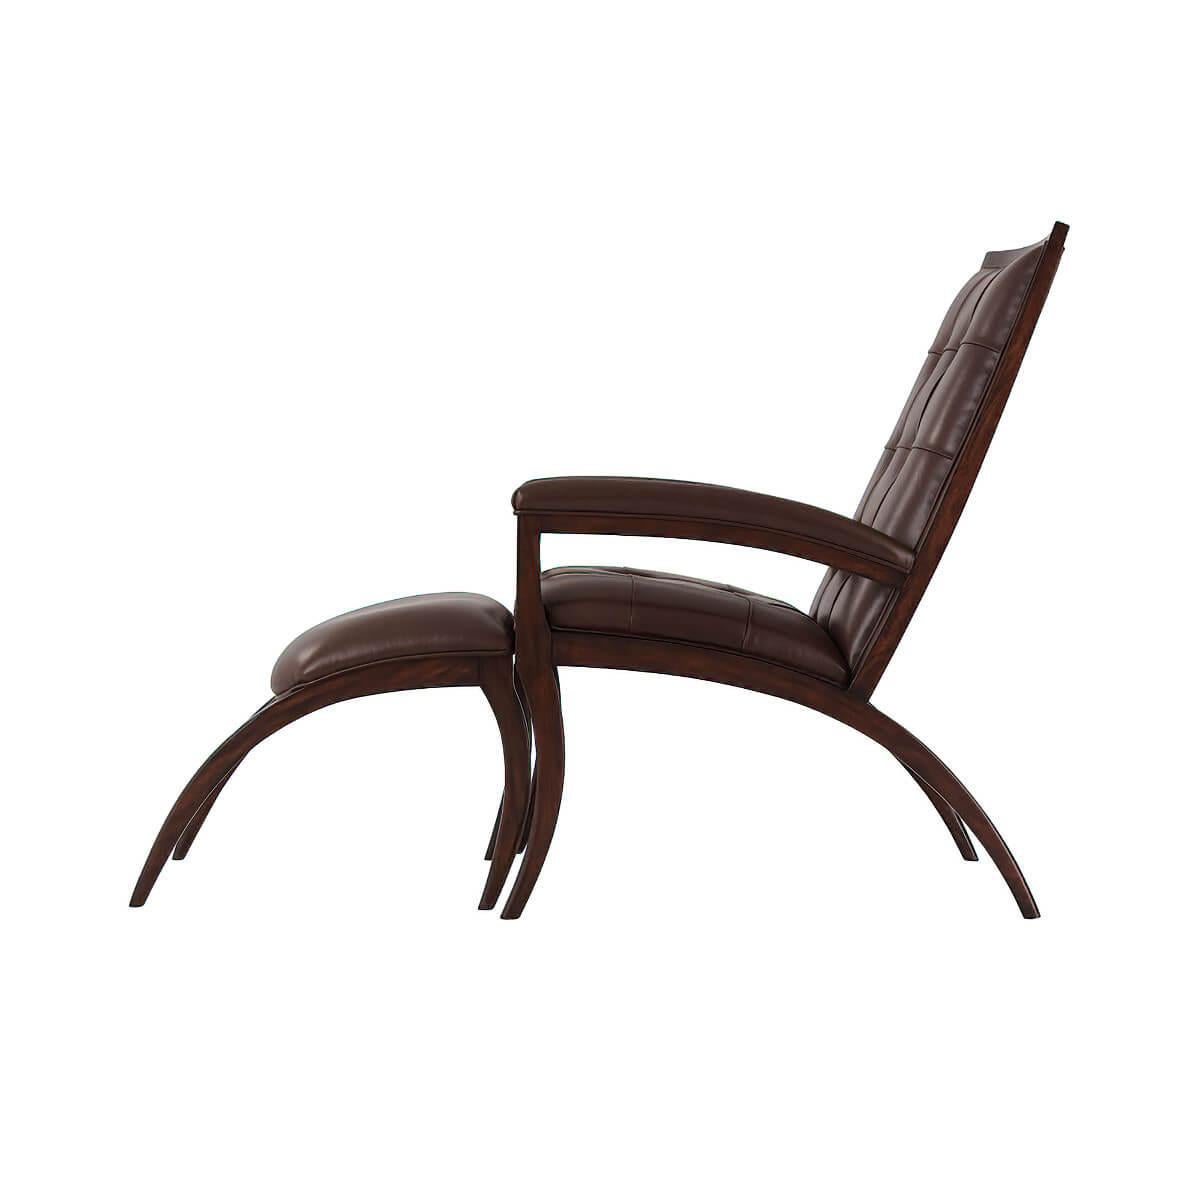 Mid-Century Modern leather armchair and footrest, a mahogany frame with button tufted leather backrest, and an arched style seat and footrest. 

Dimensions: 26.75